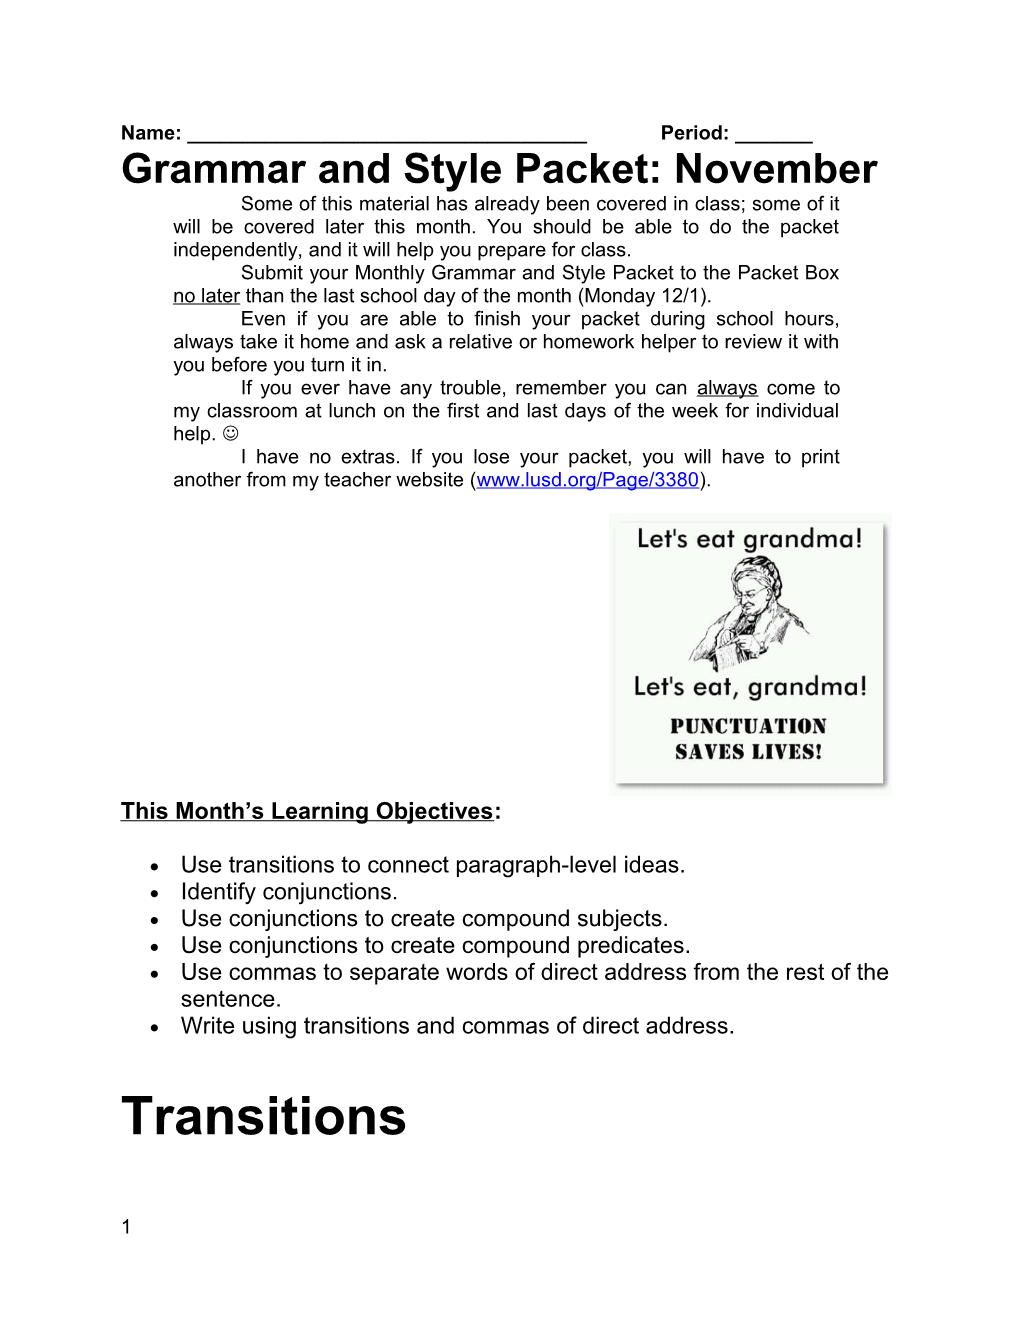 Grammar and Style Packet: November